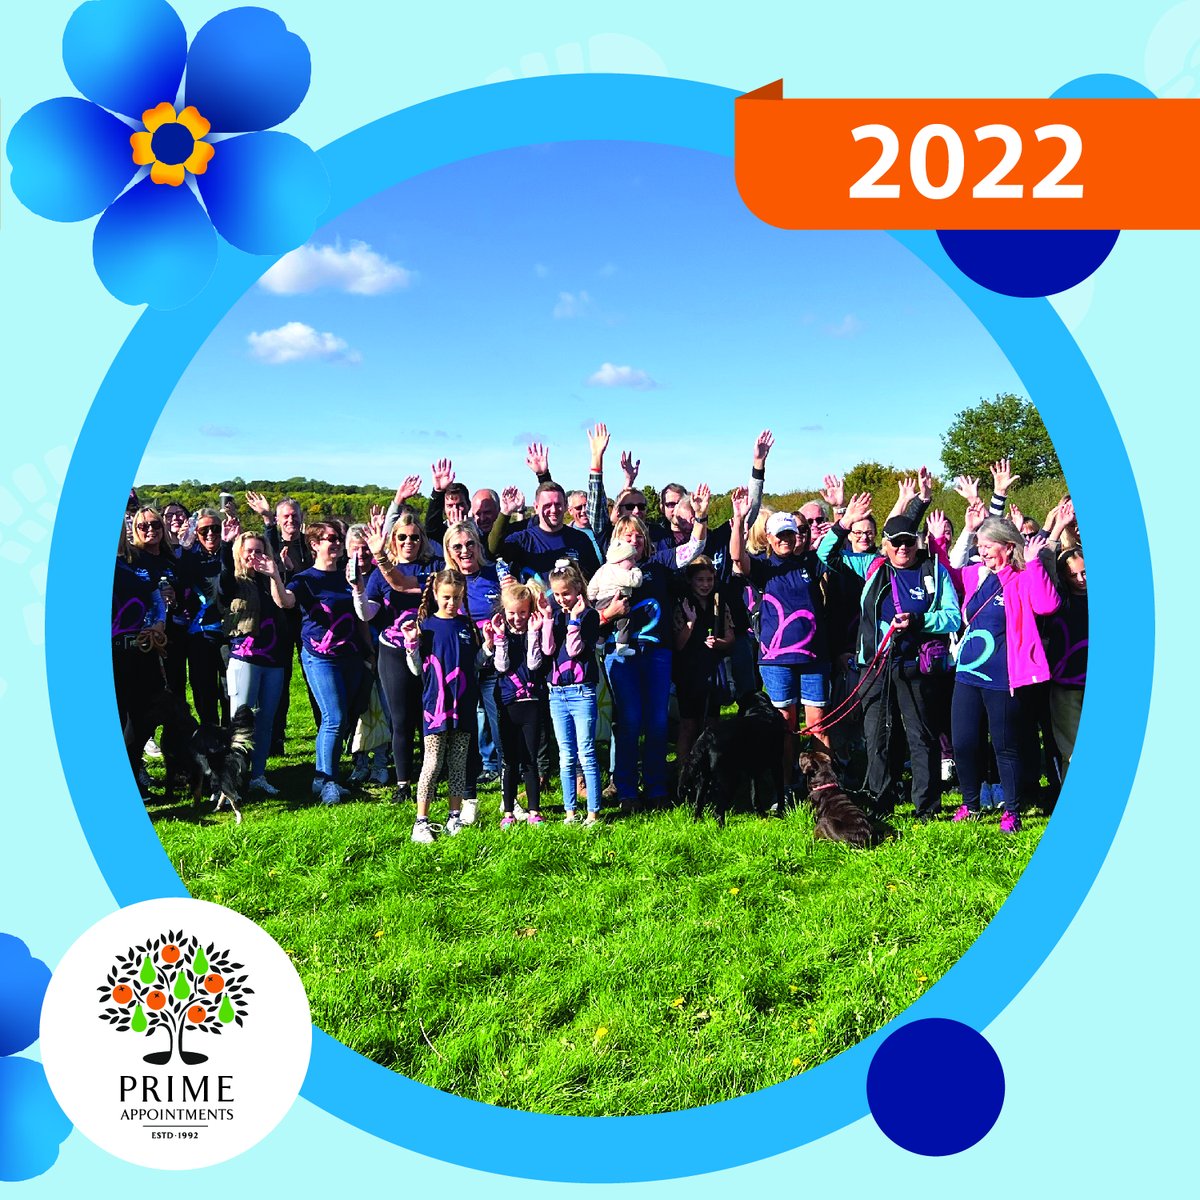 🚶‍♀️🌟 Join us for our 4th Annual #Alzheimer's Society Memory Walk, creating memories with meaning since 2019. Be part of our 2023 event! Let's make every step count! 💙 ow.ly/uV8R50PMR9I #MemoryWalk2023 #Community #PrimeAppointments #CharityEvent #Essex #Witham